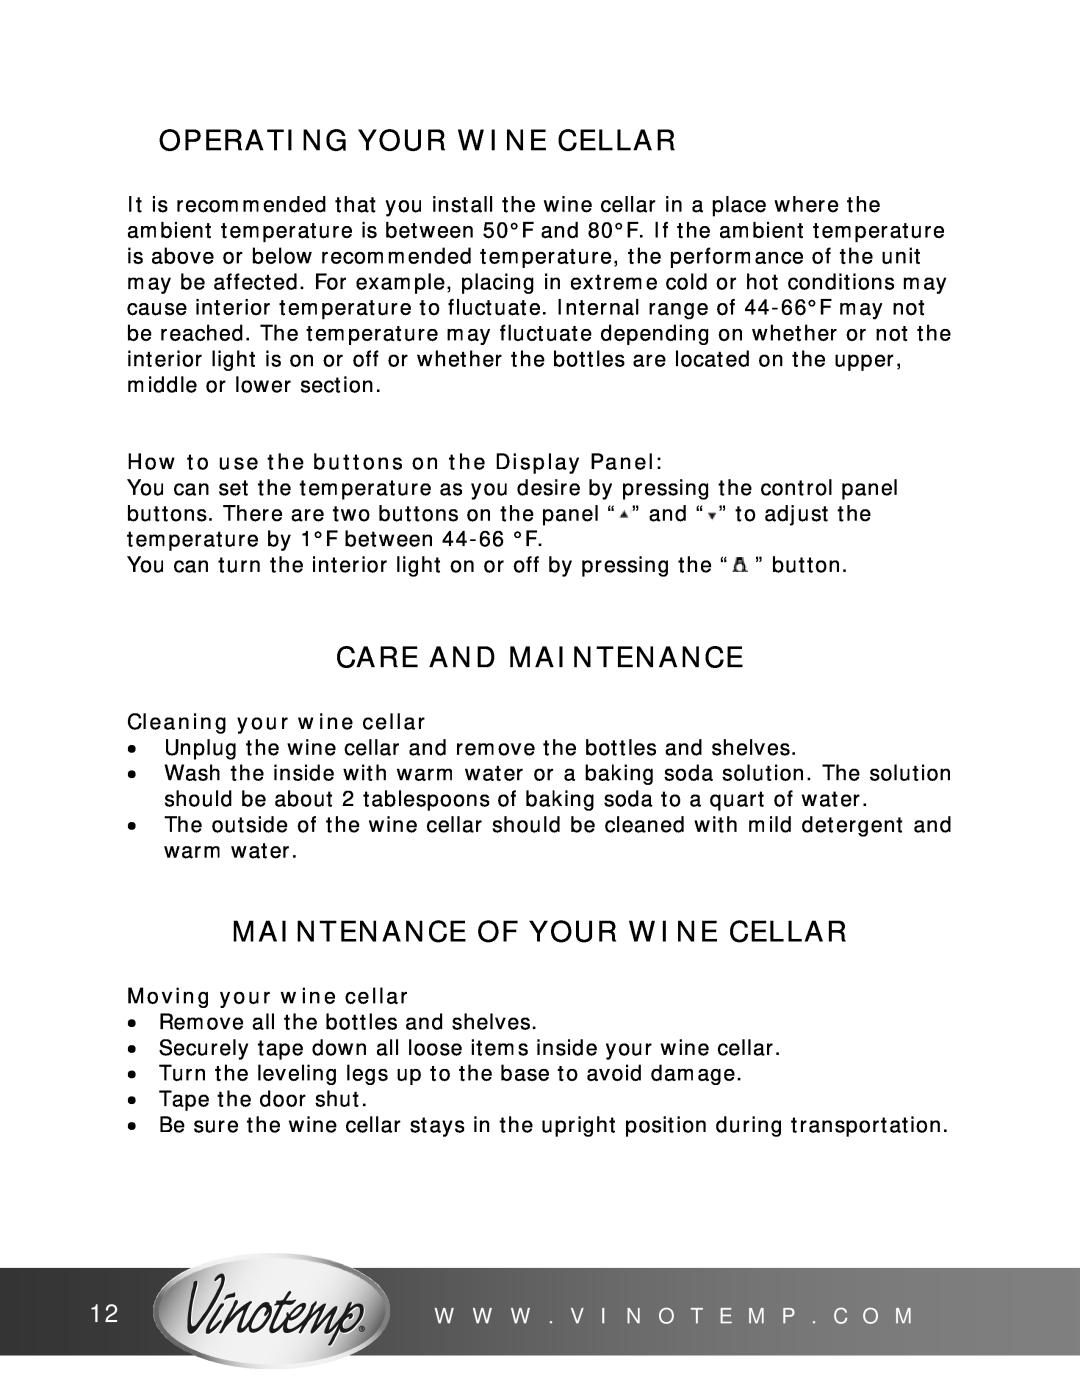 Vinotemp VT12TEDS2Z owner manual Operating Your Wine Cellar, Care And Maintenance, Maintenance Of Your Wine Cellar 